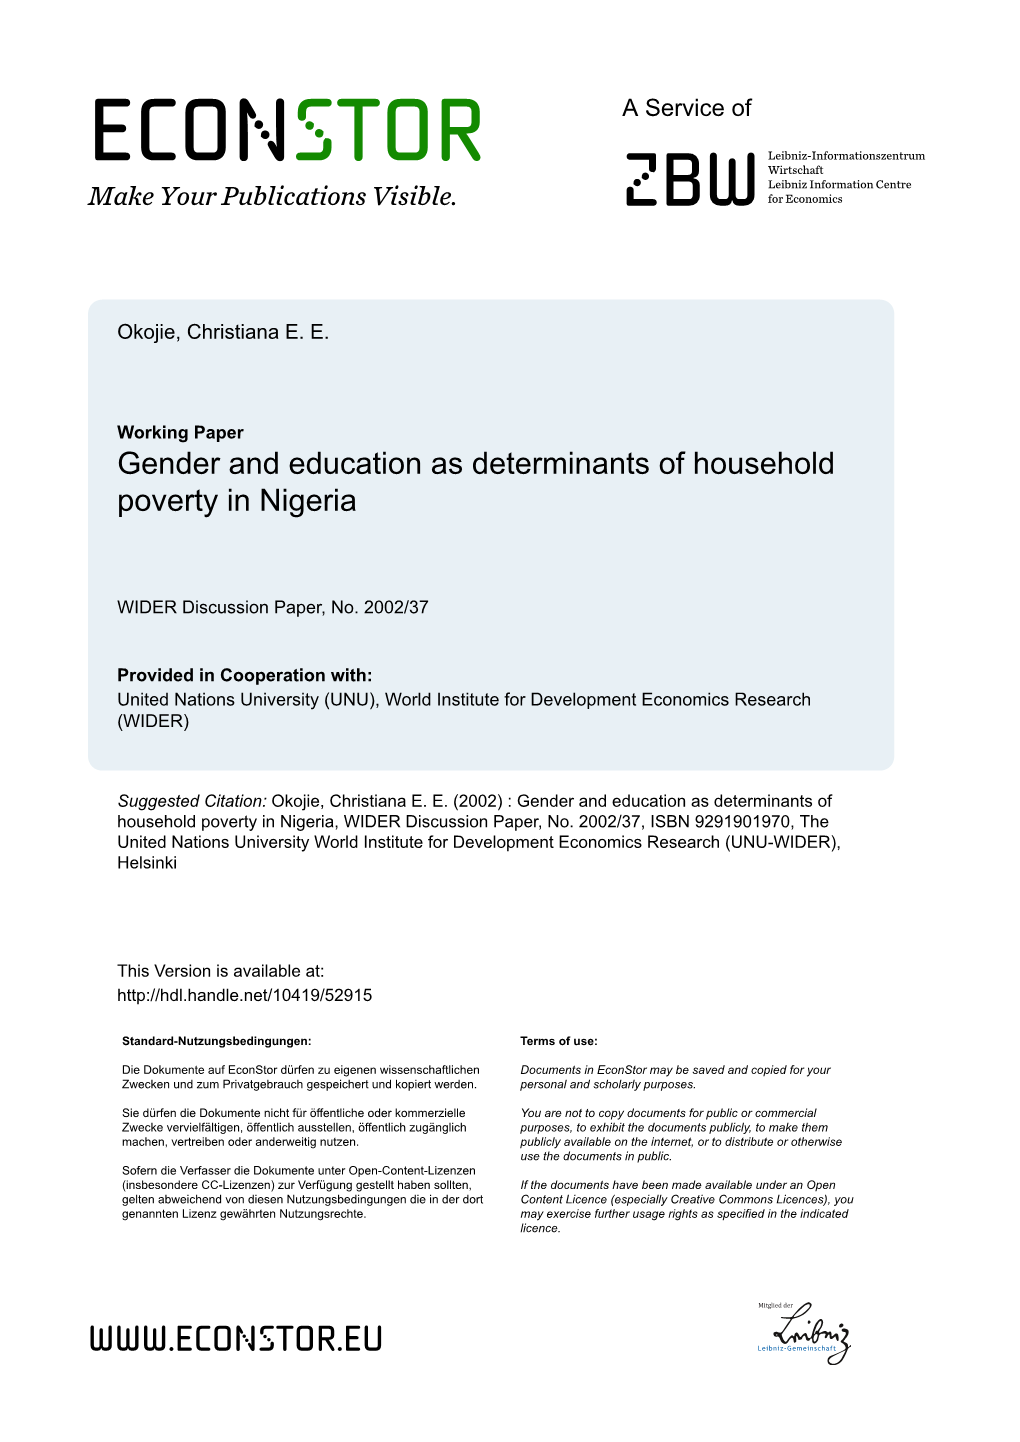 Gender and Education As Determinants of Household Poverty in Nigeria